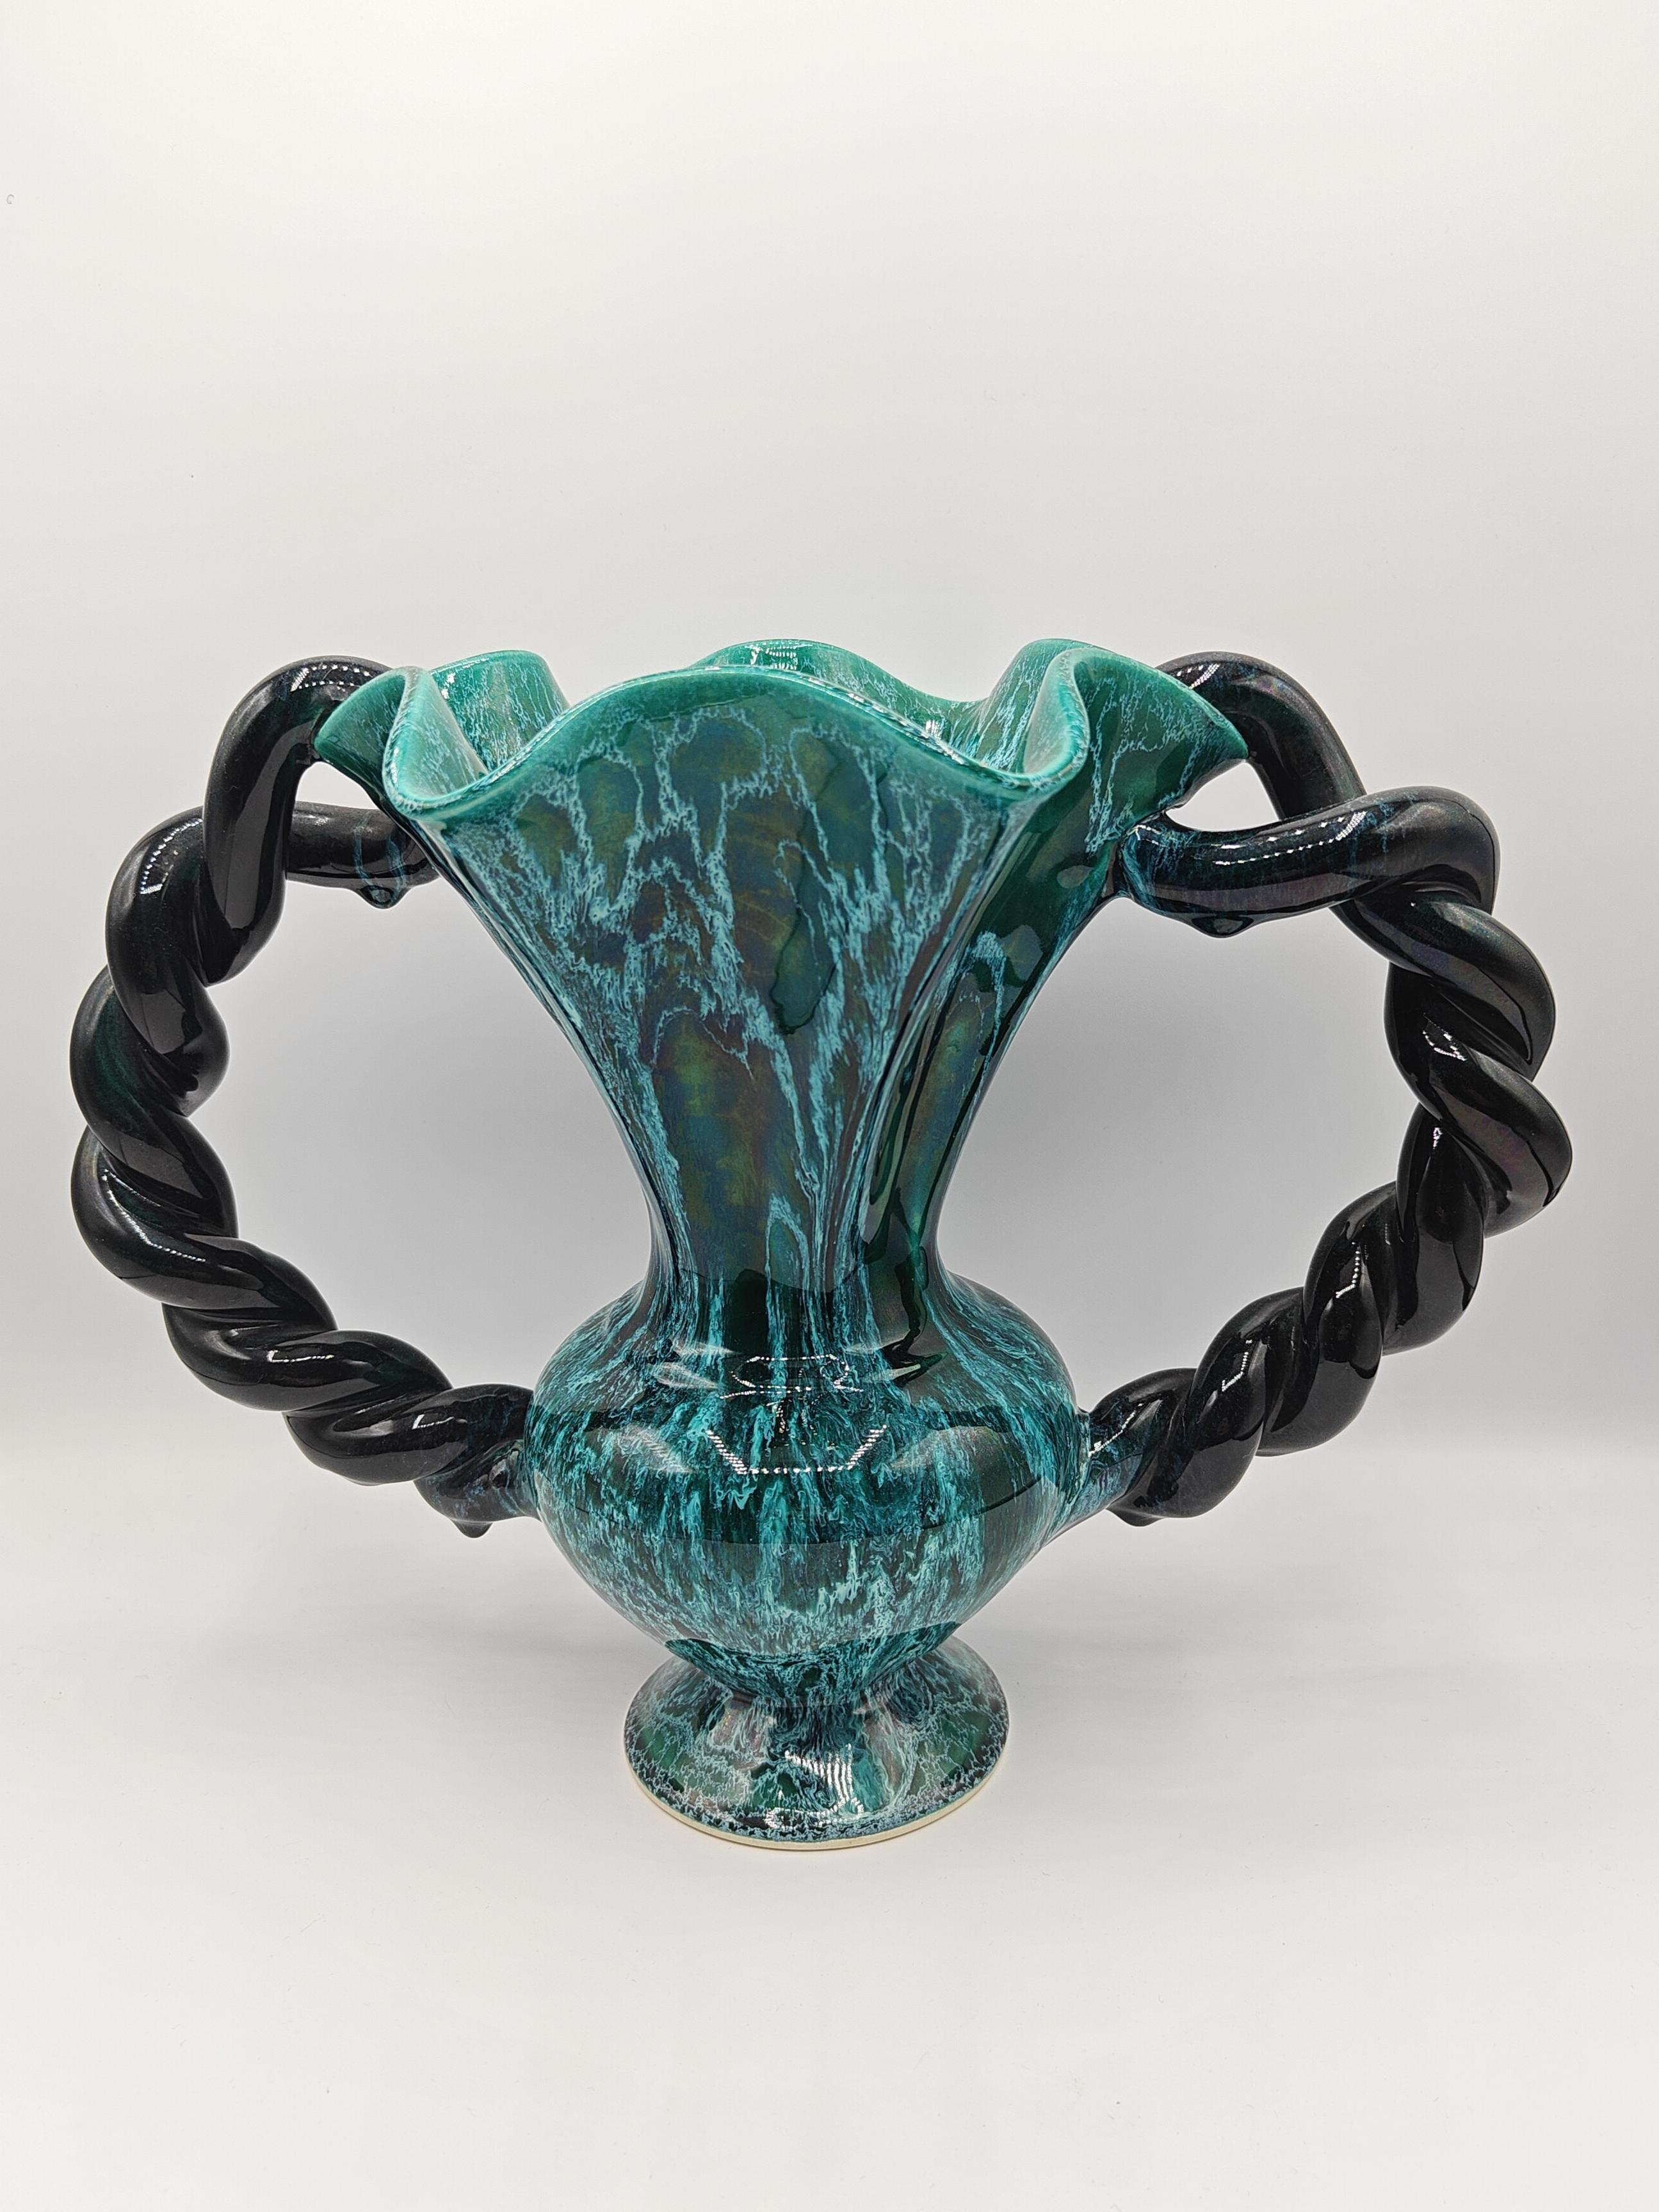 Magnificent vase from the 1950s, in enamelled ceramic, by Marius Giuge, ceramist from Vallauris. The malachite green enamel with these white or black gradients are very recognizable in the work of Marius Giuge. 

This vase is signed by enamel